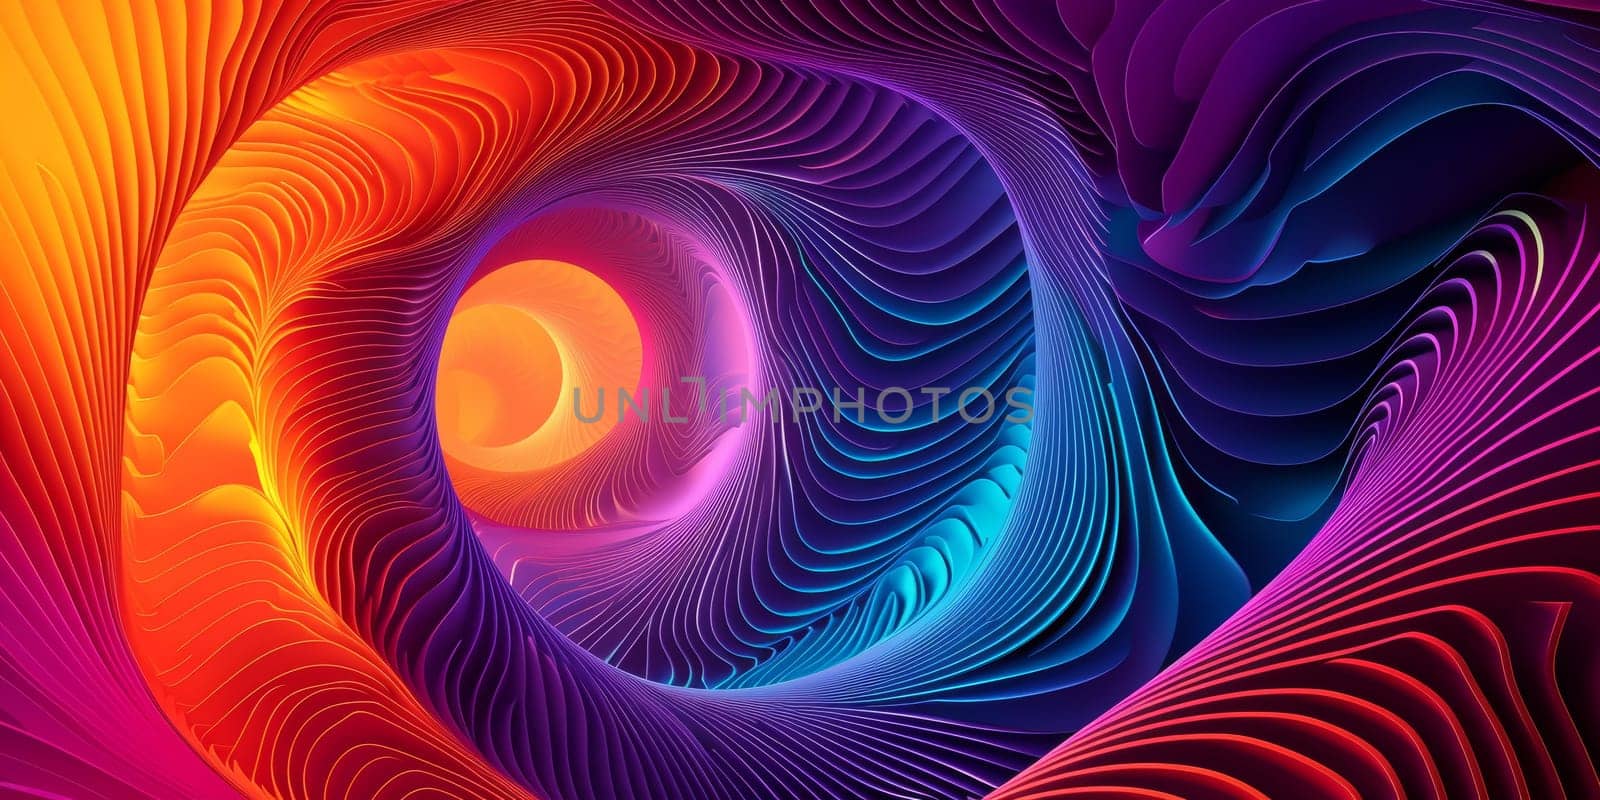 A colorful abstract image of a spiral design with swirls, AI by starush